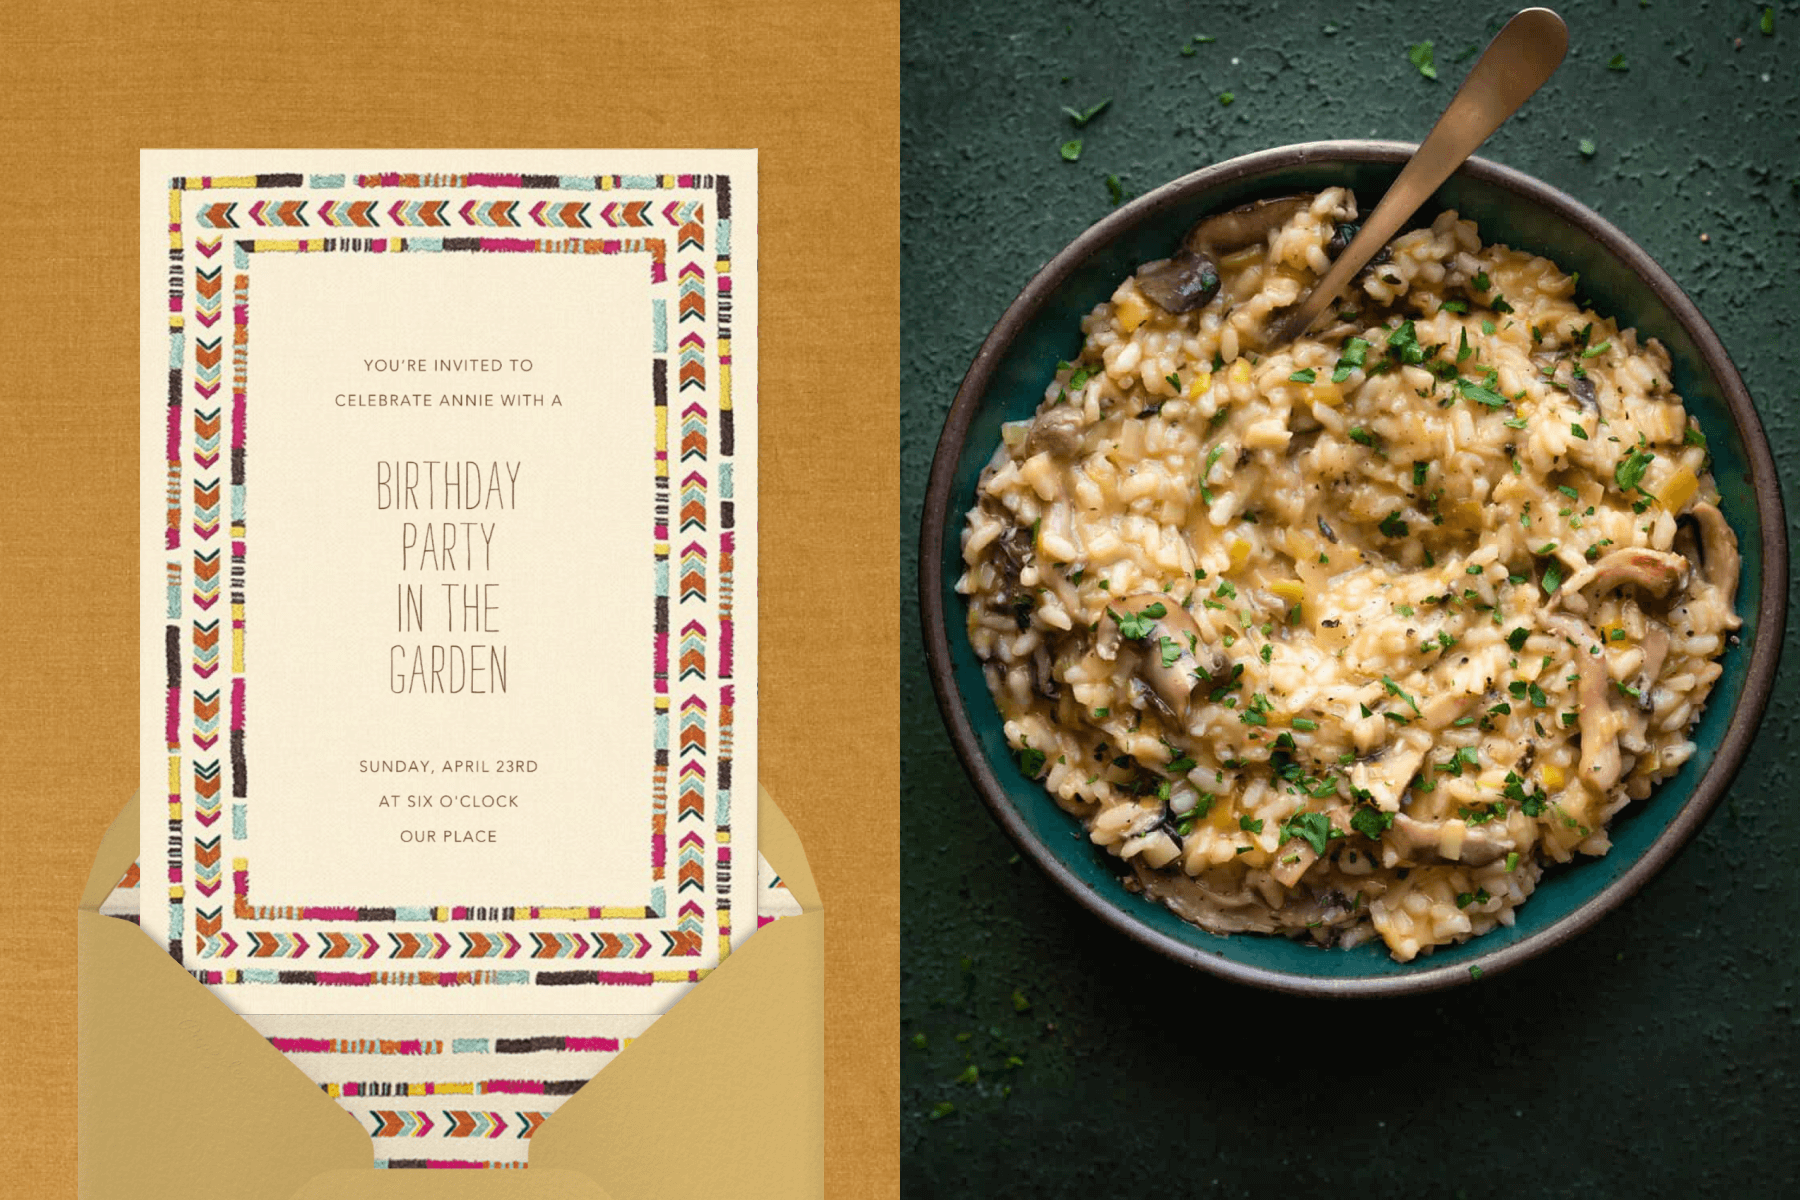 Left: A birthday party invitation with colorful chevron stripes around the border that appear to be embroidered on. Right: A bowl of mushroom risotto.